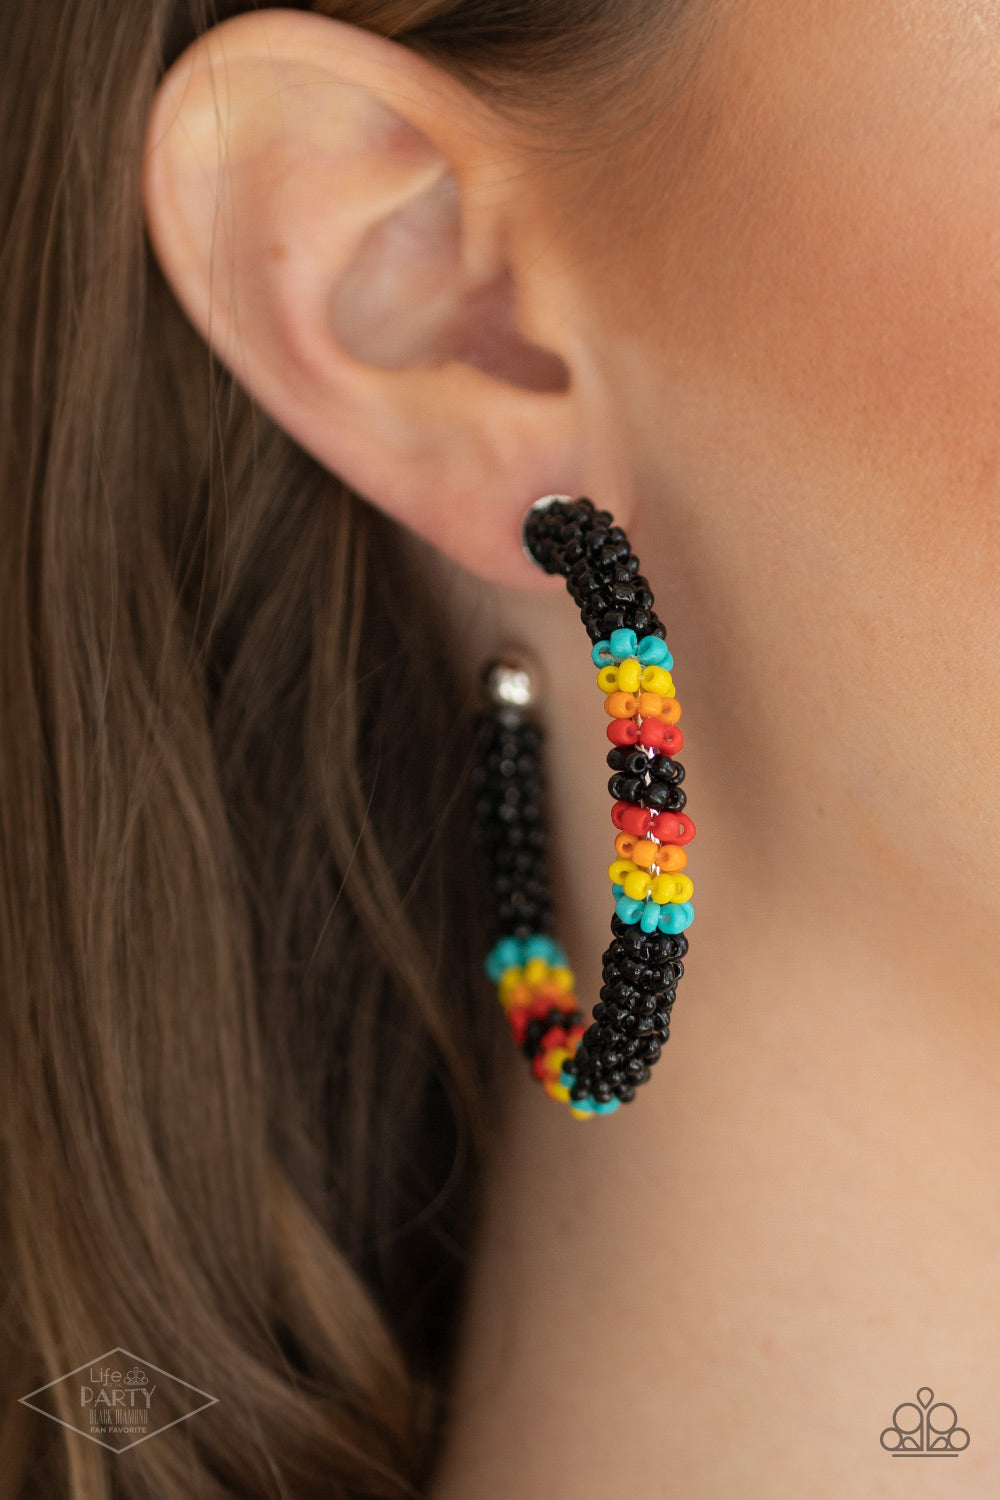 Bodaciously Beaded - Black - Colorful Seed  Bead - Hoop Earrings - Paparazzi Accessories - A colorful strand of black, blue, yellow, orange, and red seed beads wraps around a shiny silver hoop, creating a colorfully seasonal look. Earring attaches to a standard post fitting. Hoop measures approximately 2" in diameter. Sold as one pair of hoop earrings.